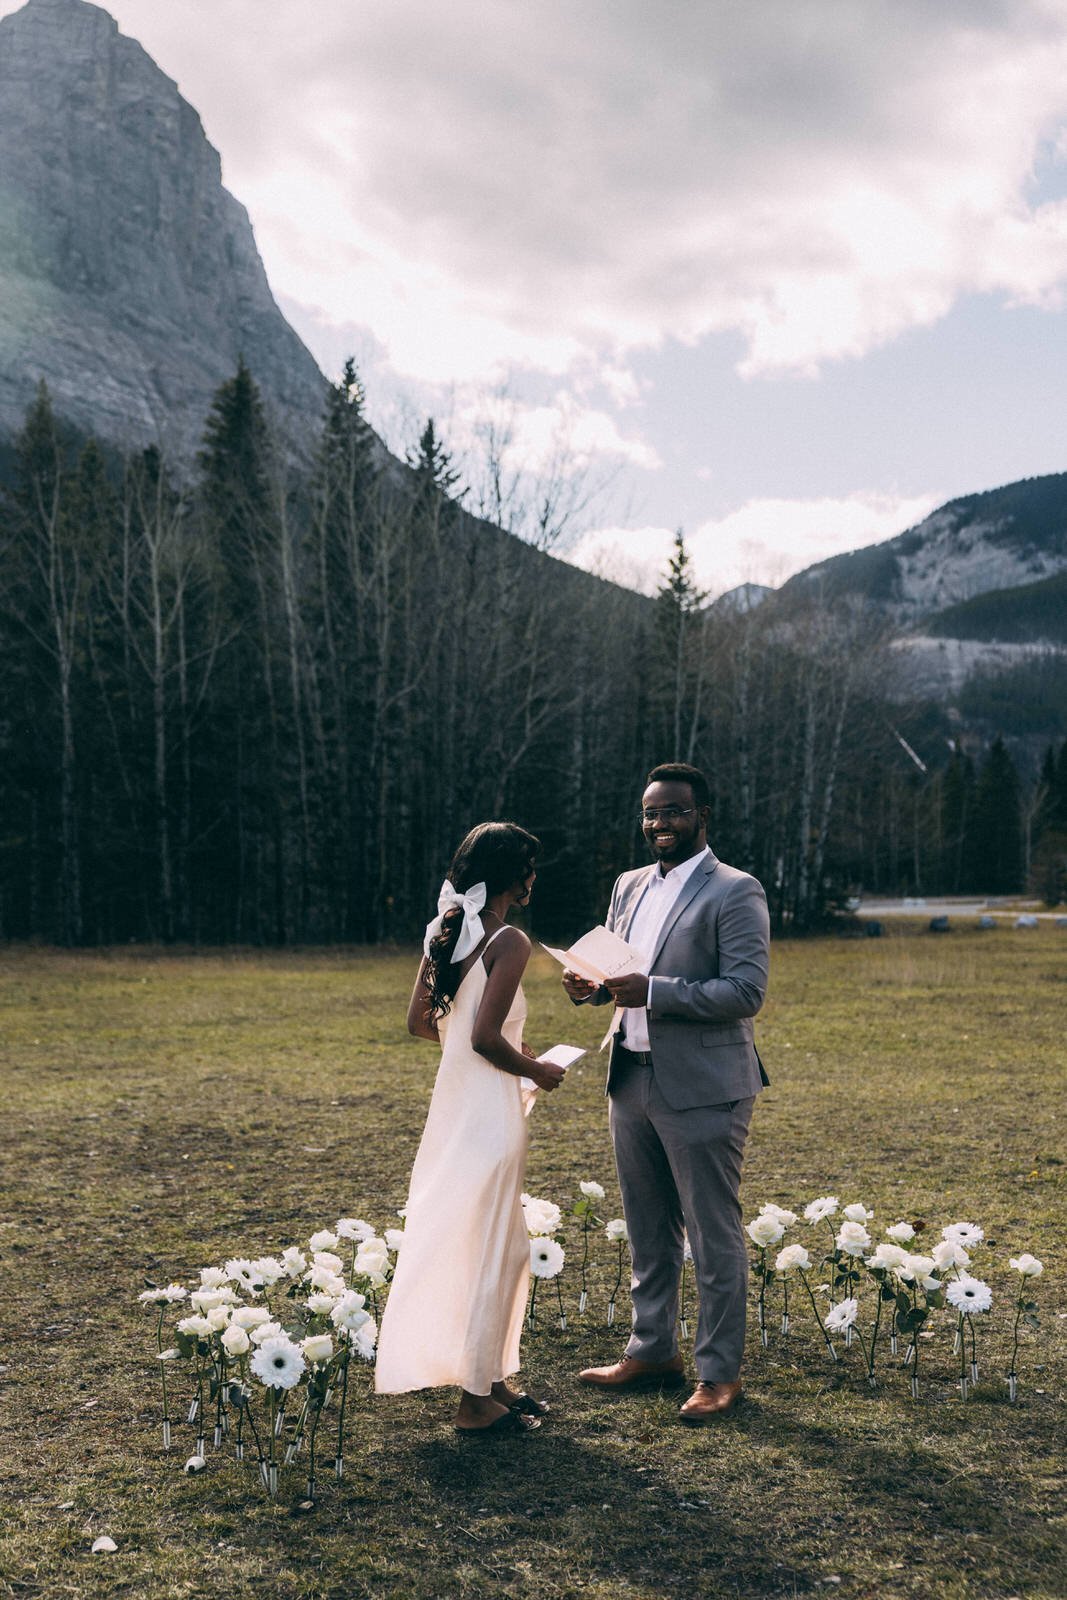 vow renewal / anniversary photoshoot in canmore alberta